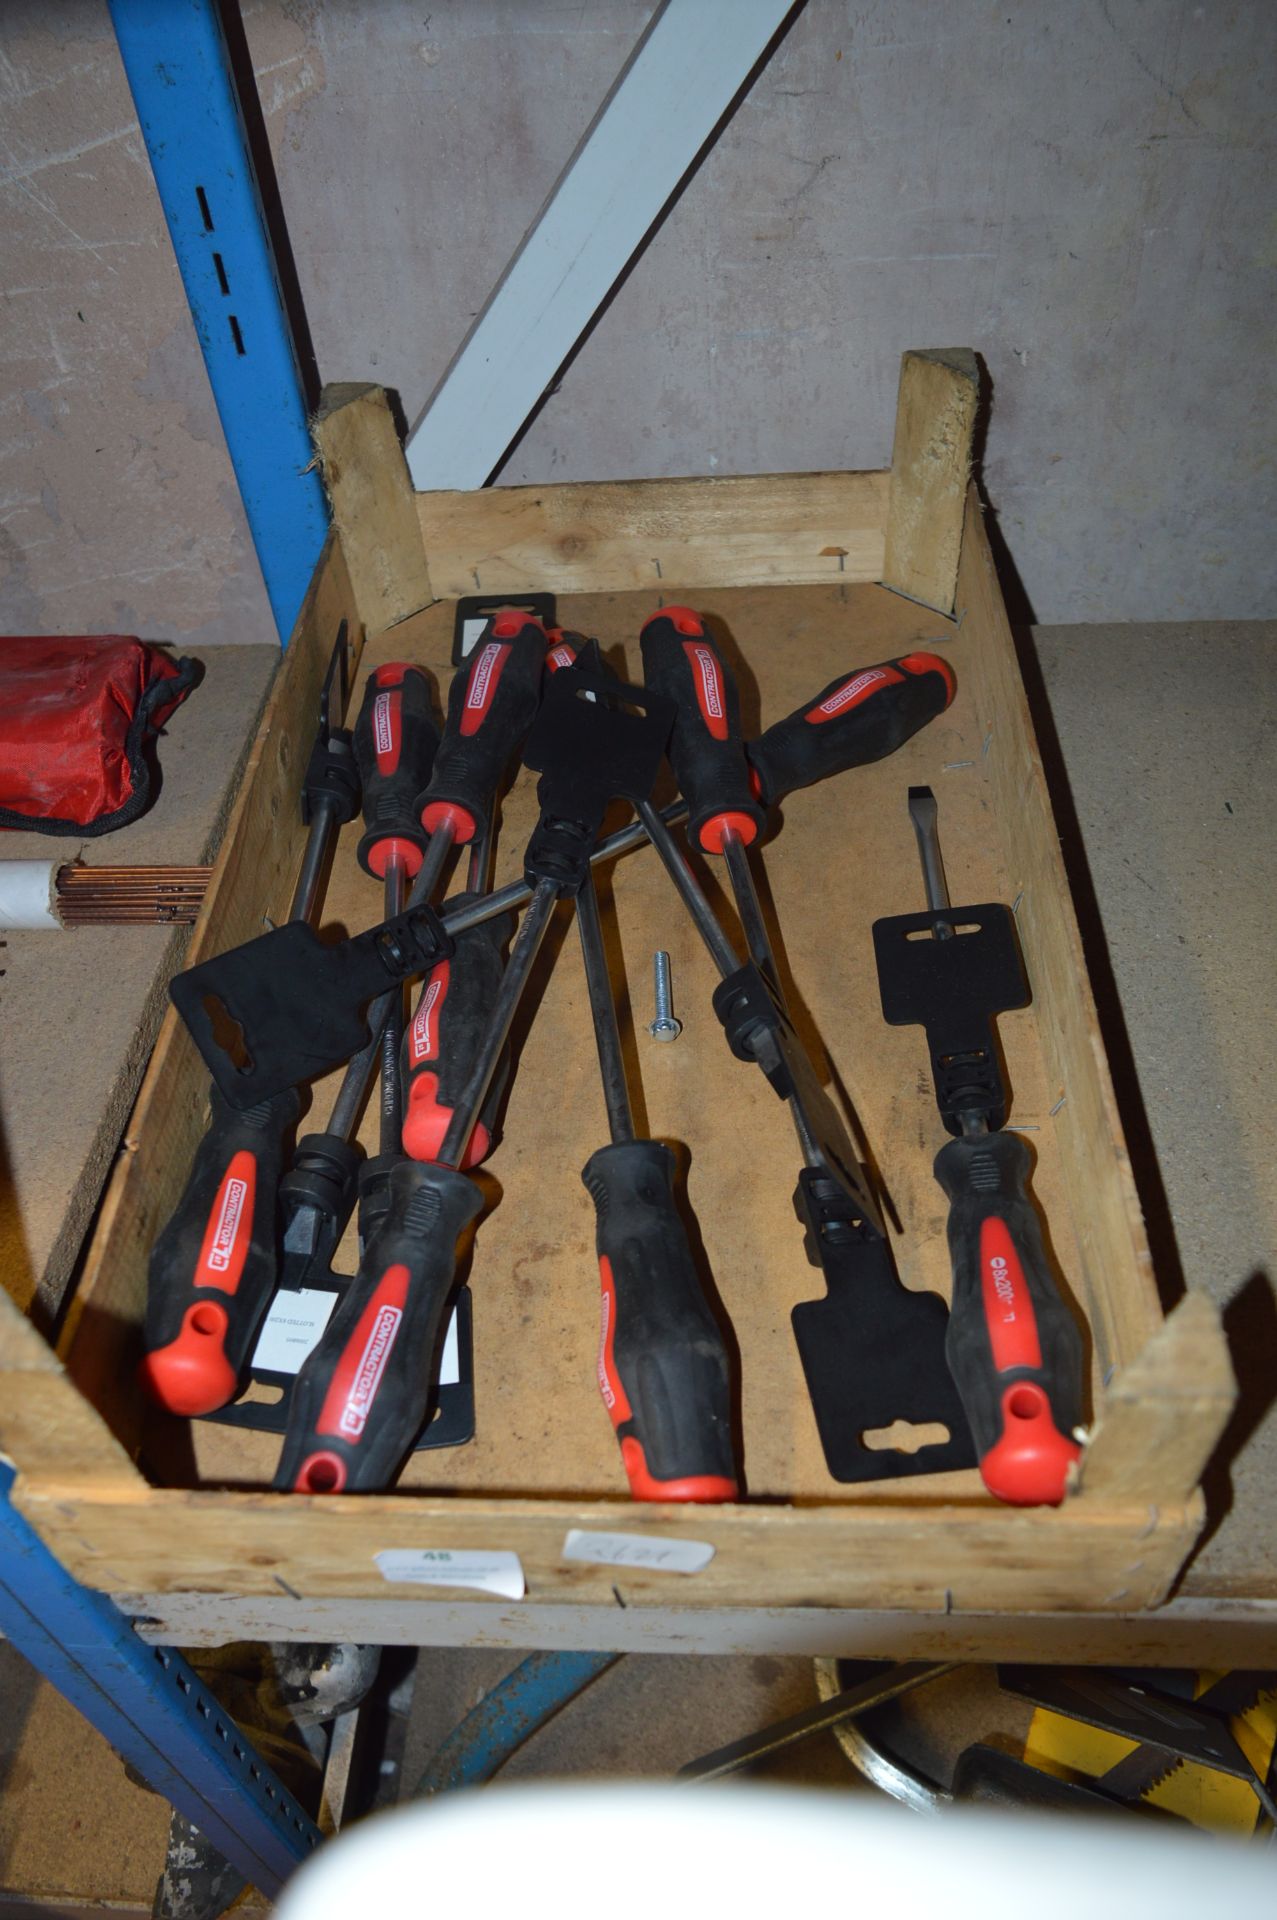 *Box of 8 by 200mm Screwdrivers